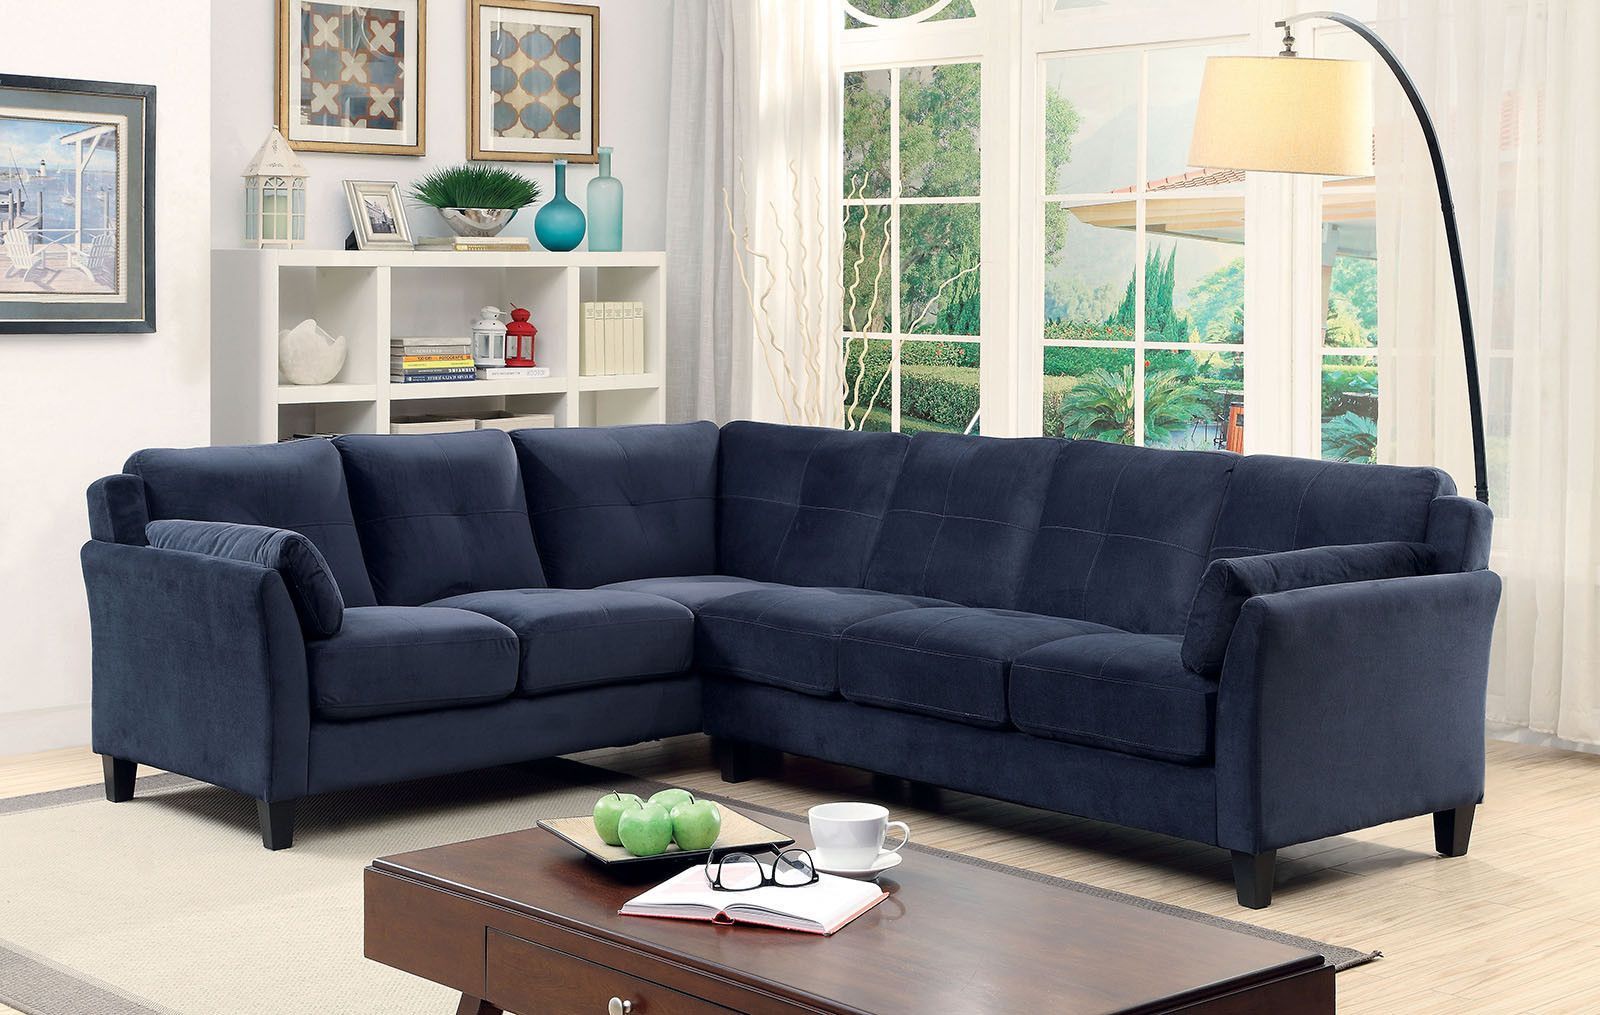 Peever Ii Navy Sectional Sofa – Cm6368nv | Living Room Sectional With Regard To Navy Linen Coil Sofas (Gallery 13 of 20)